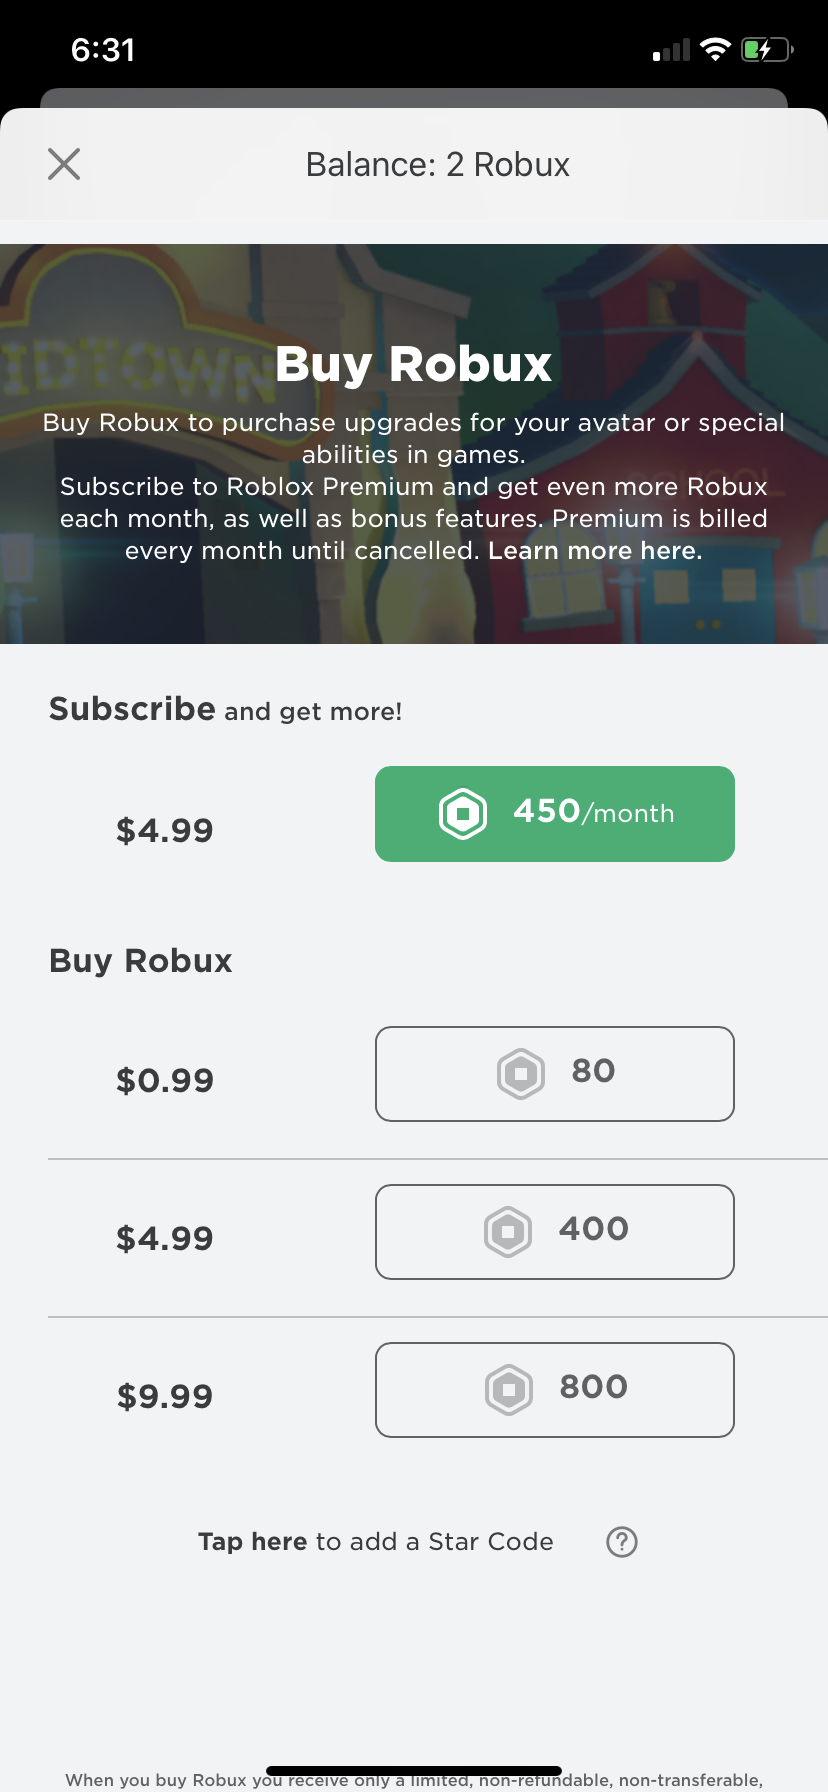 Wait Can Y All Help Me I M Trying To Get Like The 20 Robux Amount But I Don T Have That Option Fandom - buy robux get robux to purchase upgrades for your avatar or buy special abilities in games